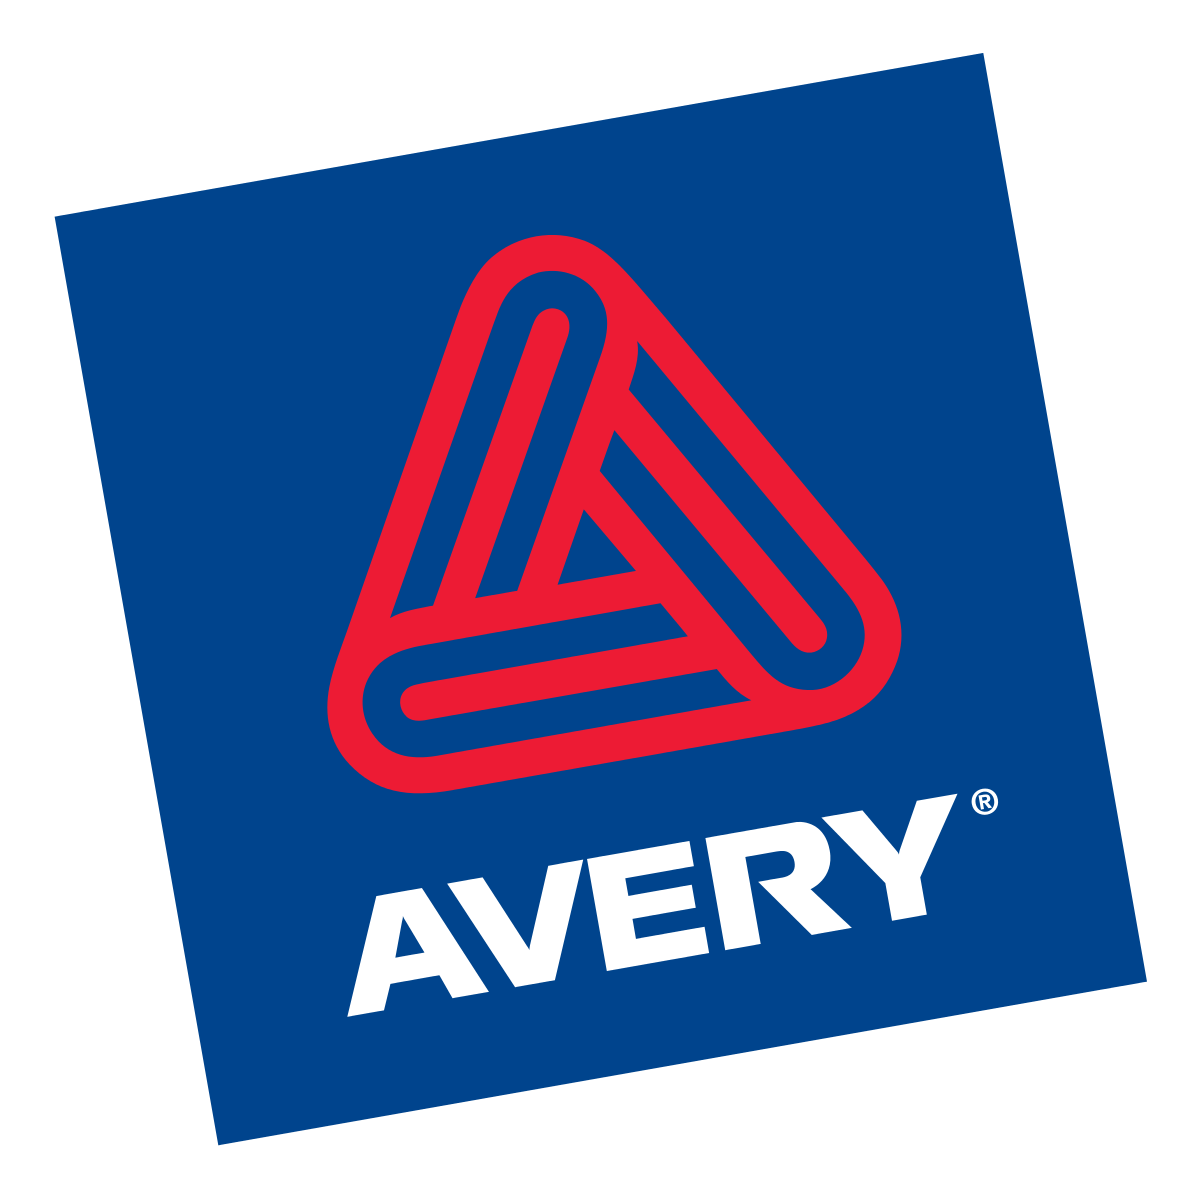 Avery Dennison PNG - 114744